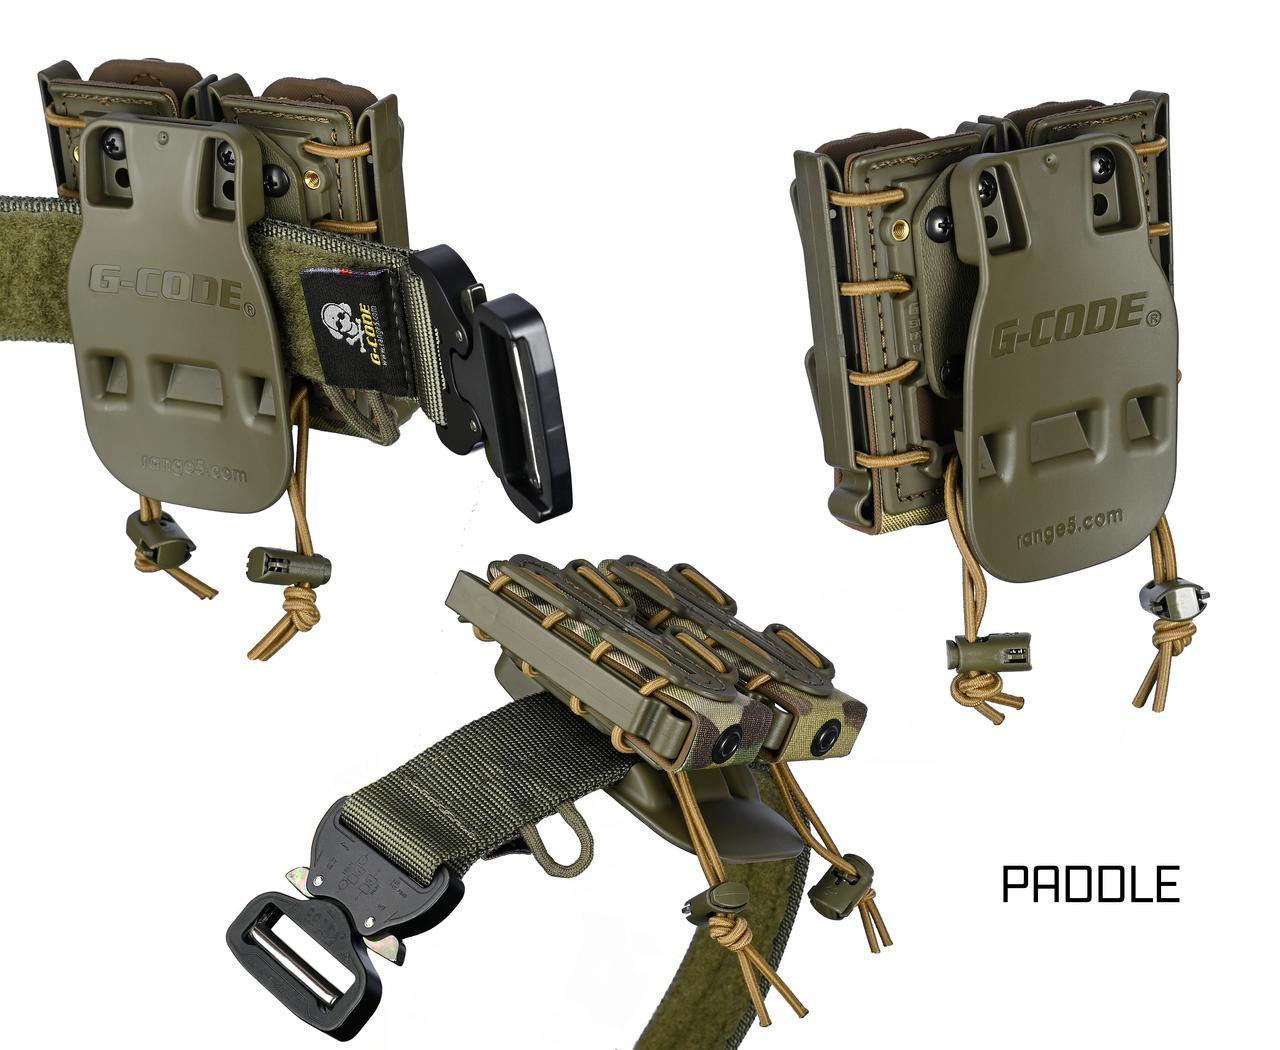 G-CODE Soft Shell Pistol Double Mag Carrier